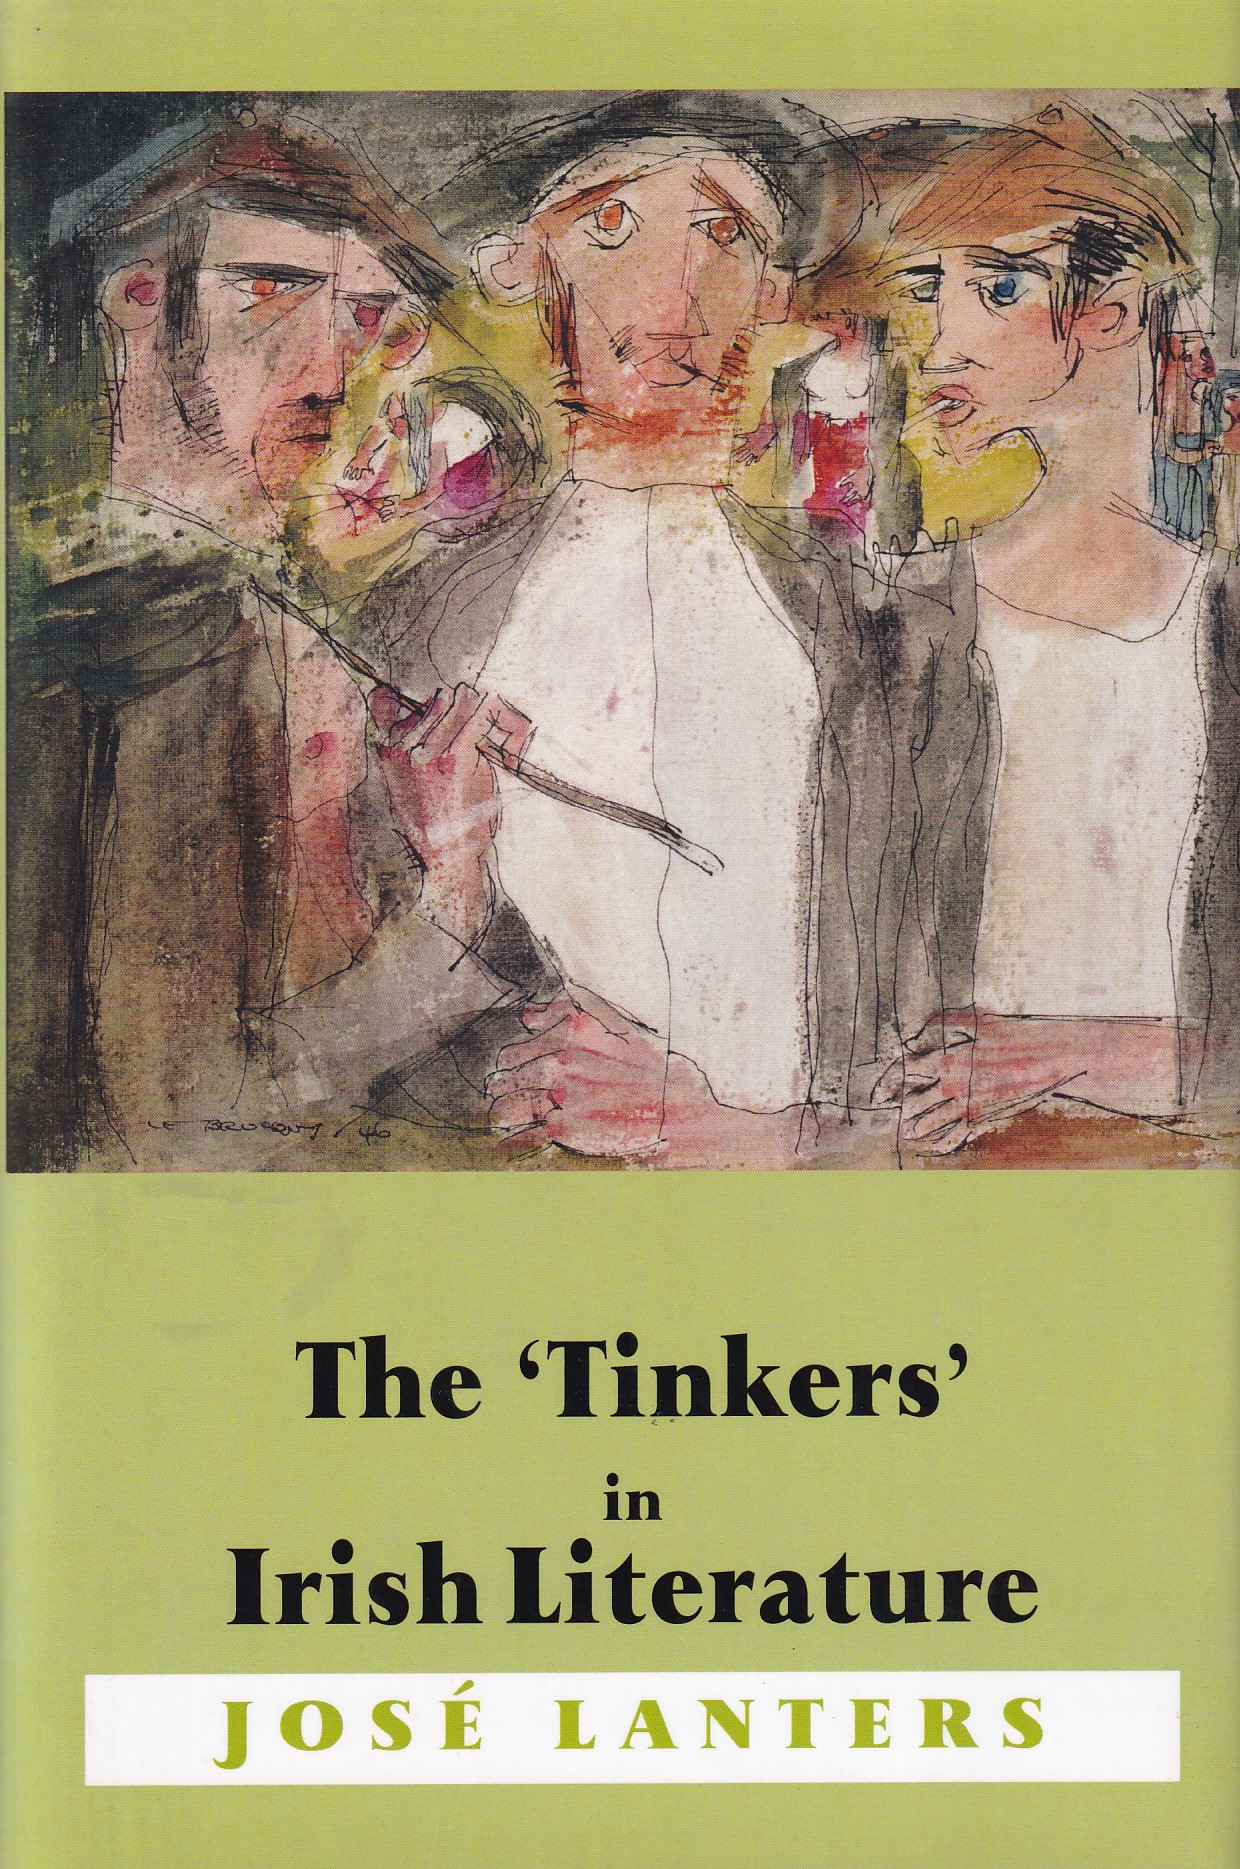 The ‘Tinkers’ in Irish Literature: Unsettled Subjects and the Construction of Difference | José Lanters | Charlie Byrne's